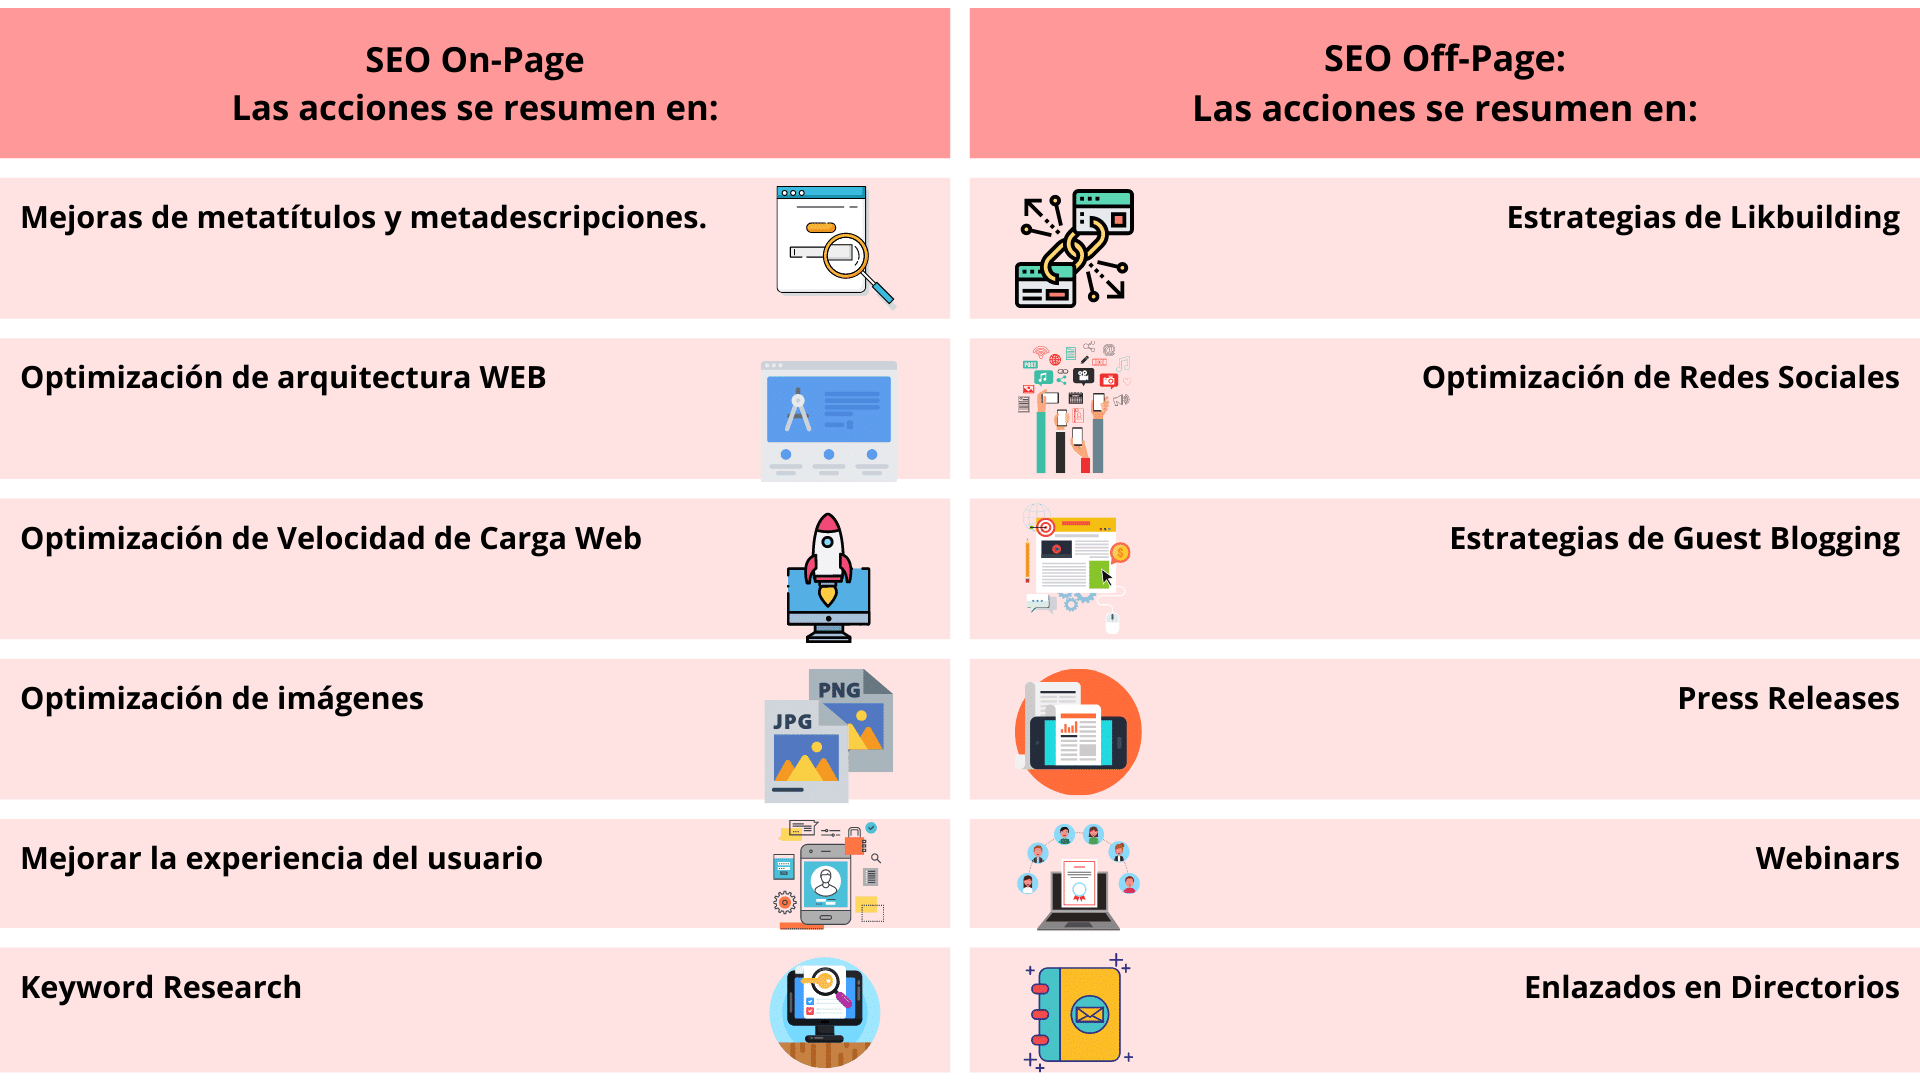 SEO on Page y SEO Off PAge comparaciÃ³n